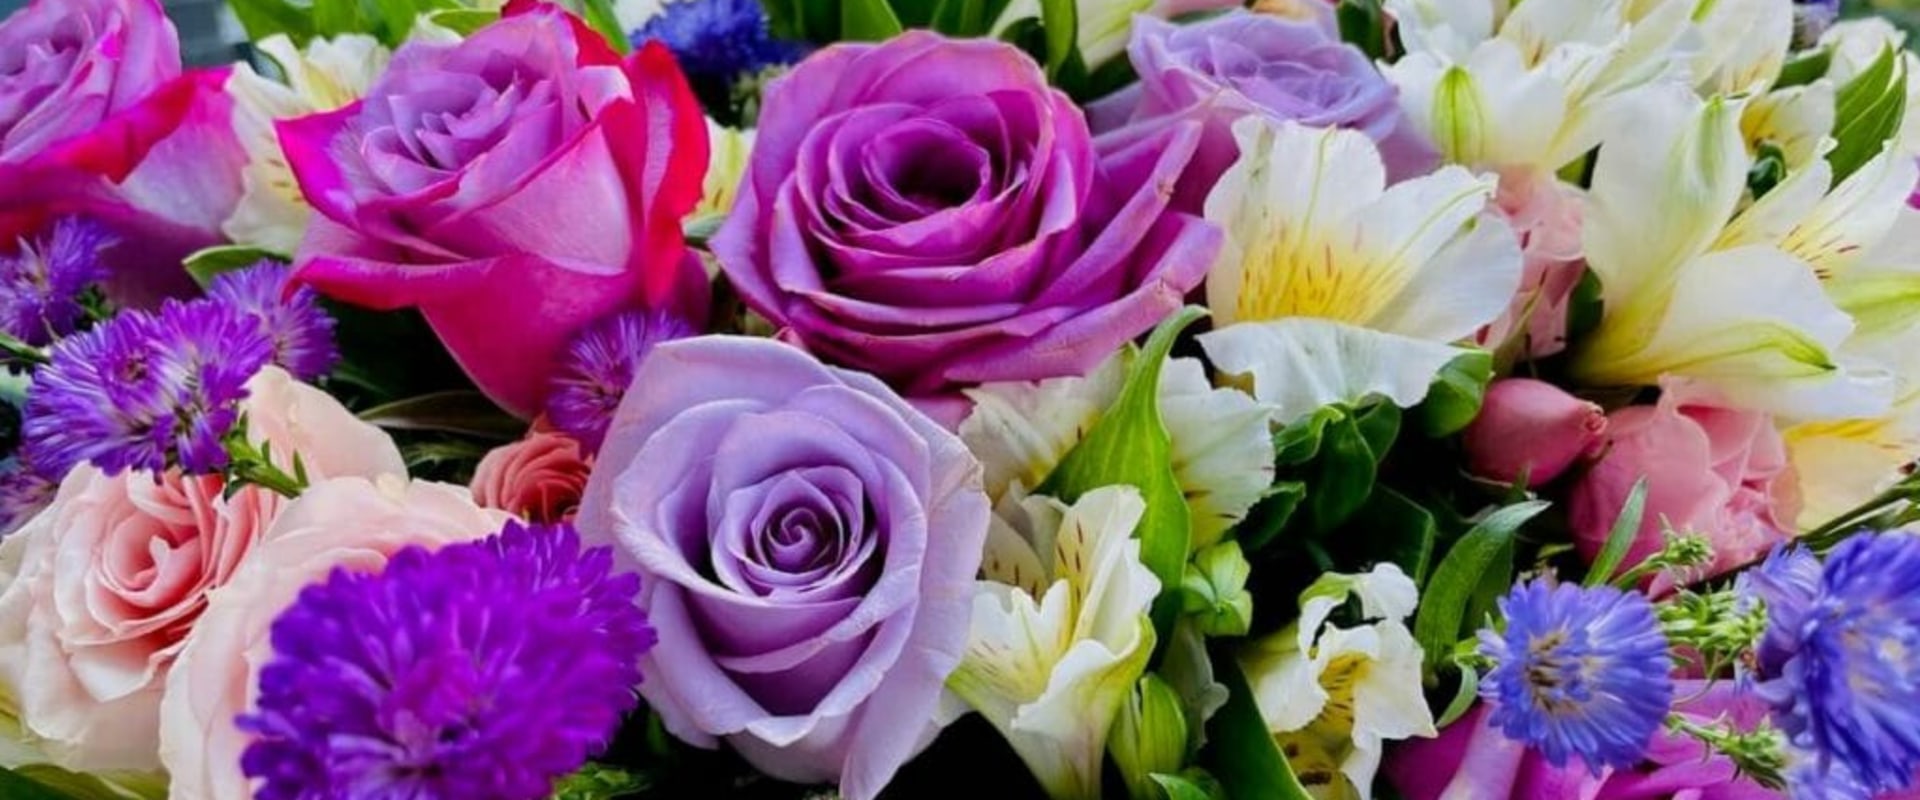 The 10 Best Florists in Oklahoma City